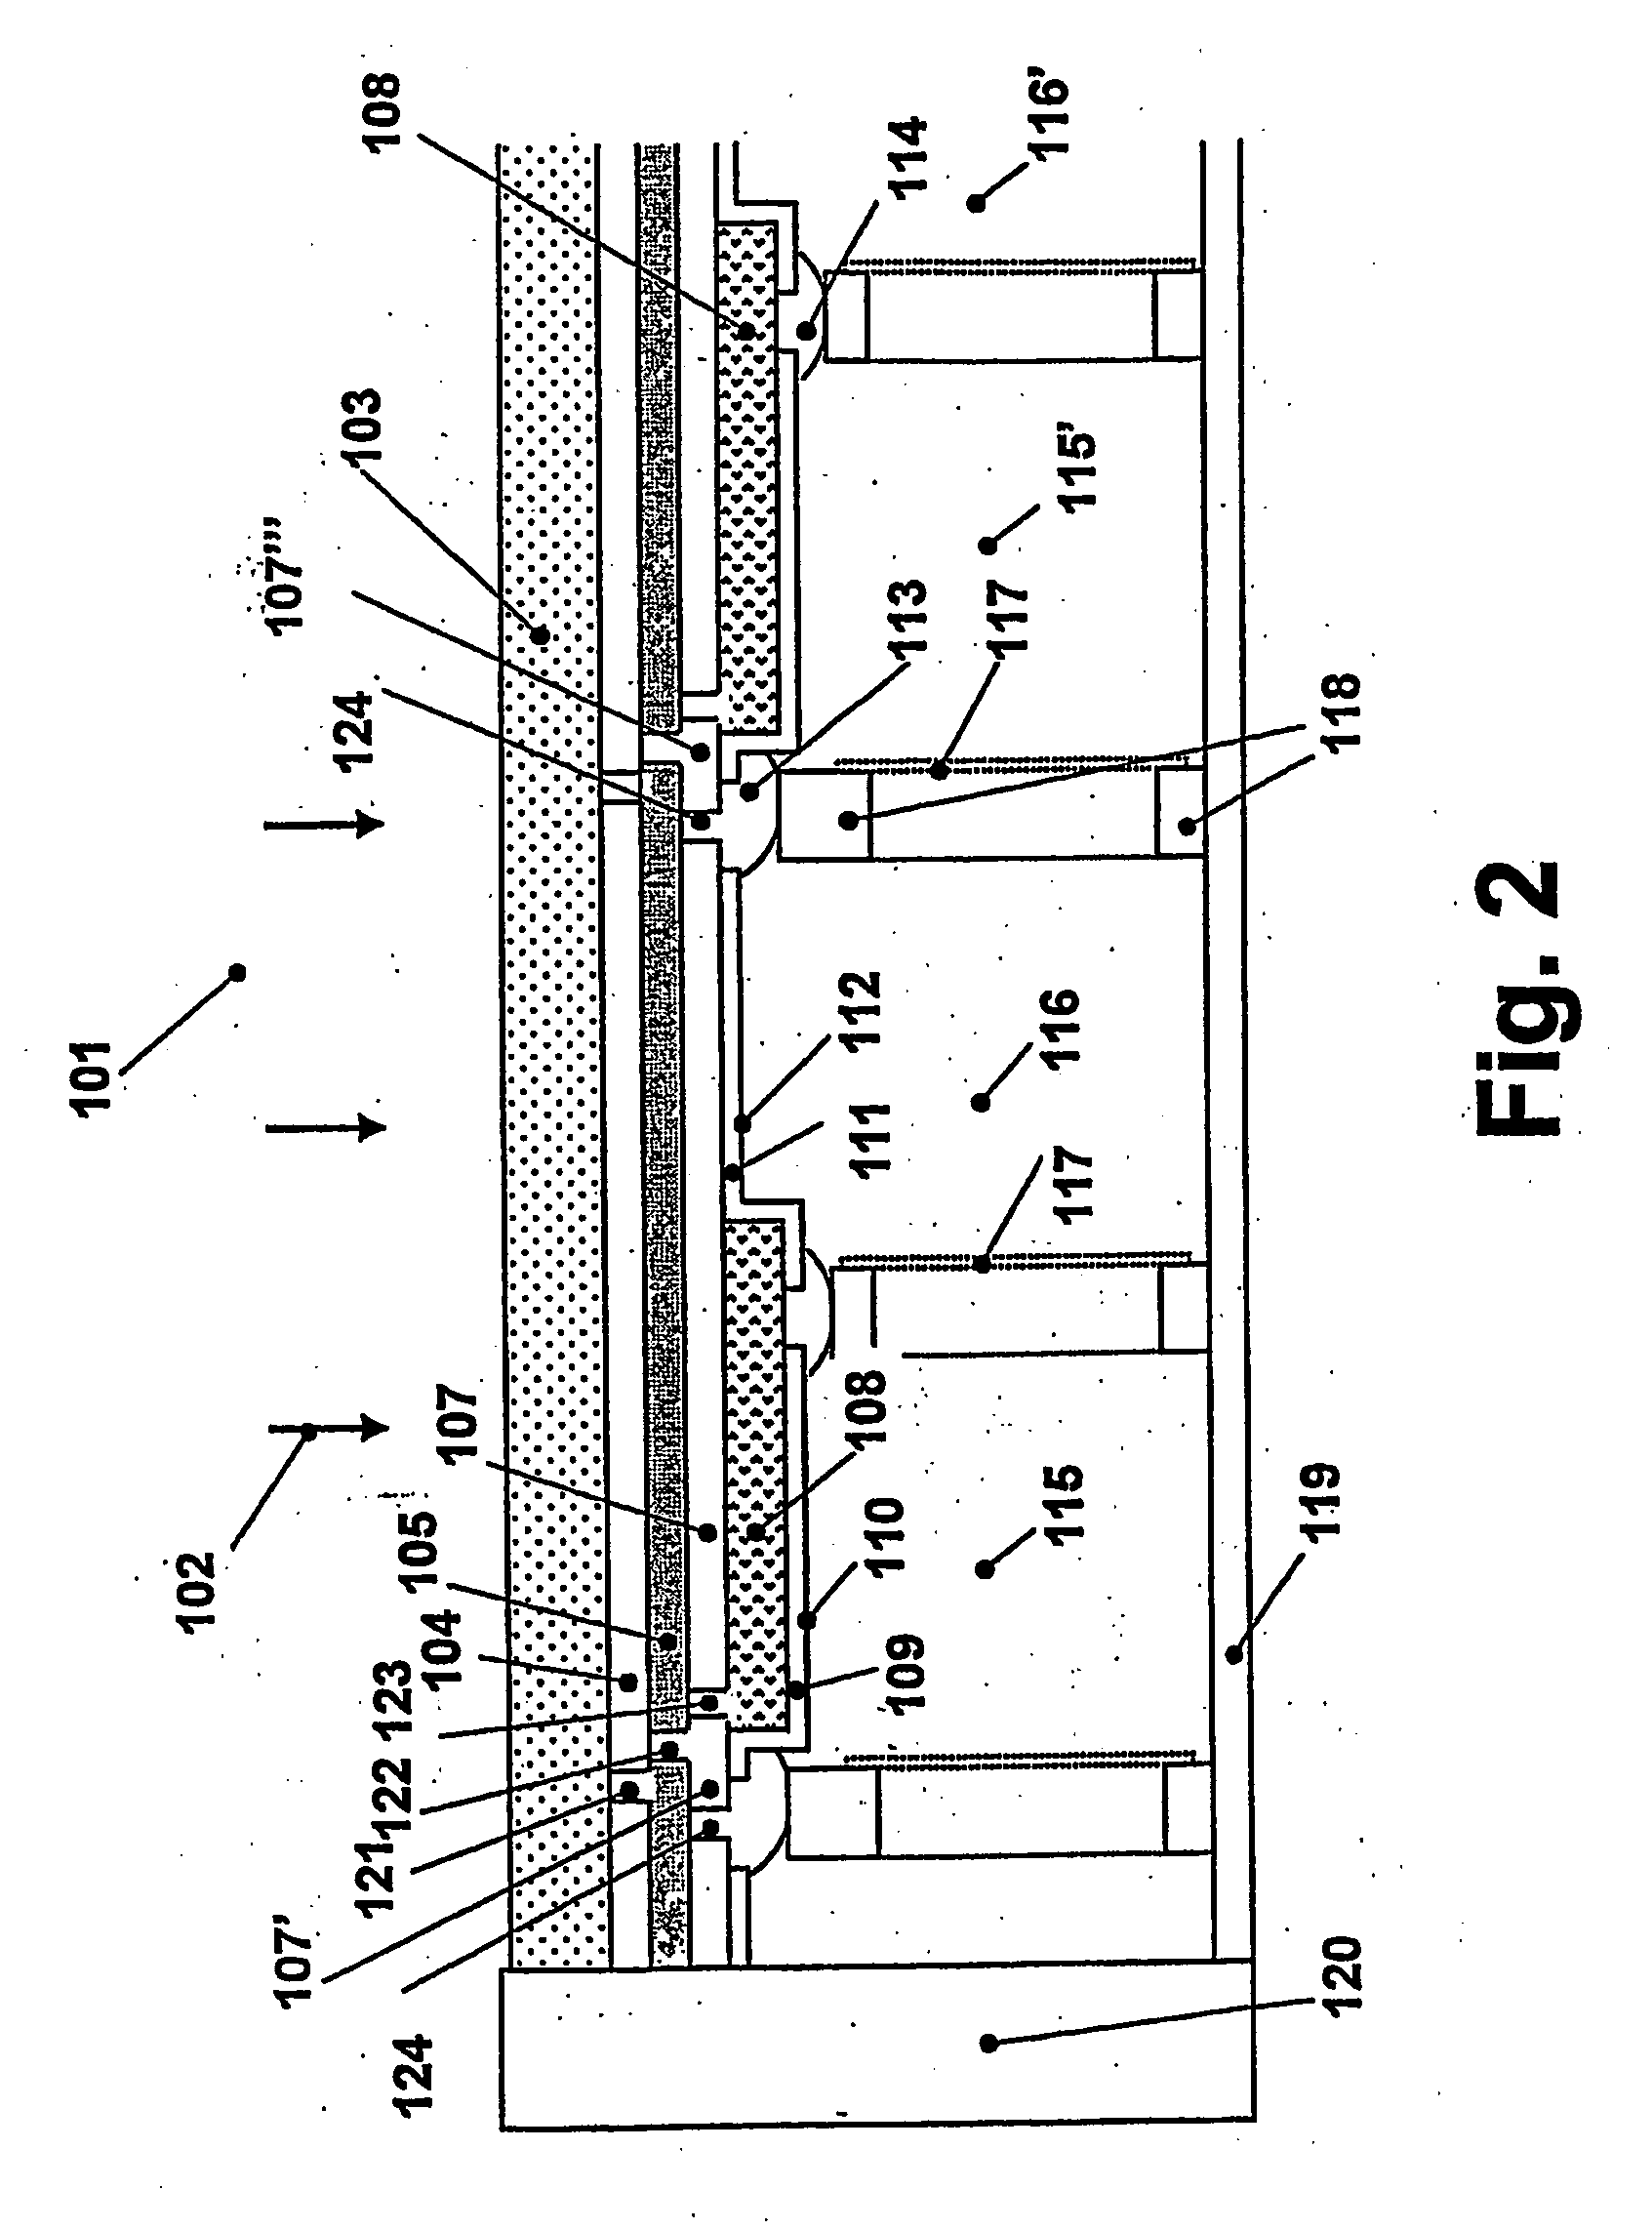 Interconnected Photoelectrochemical Cell